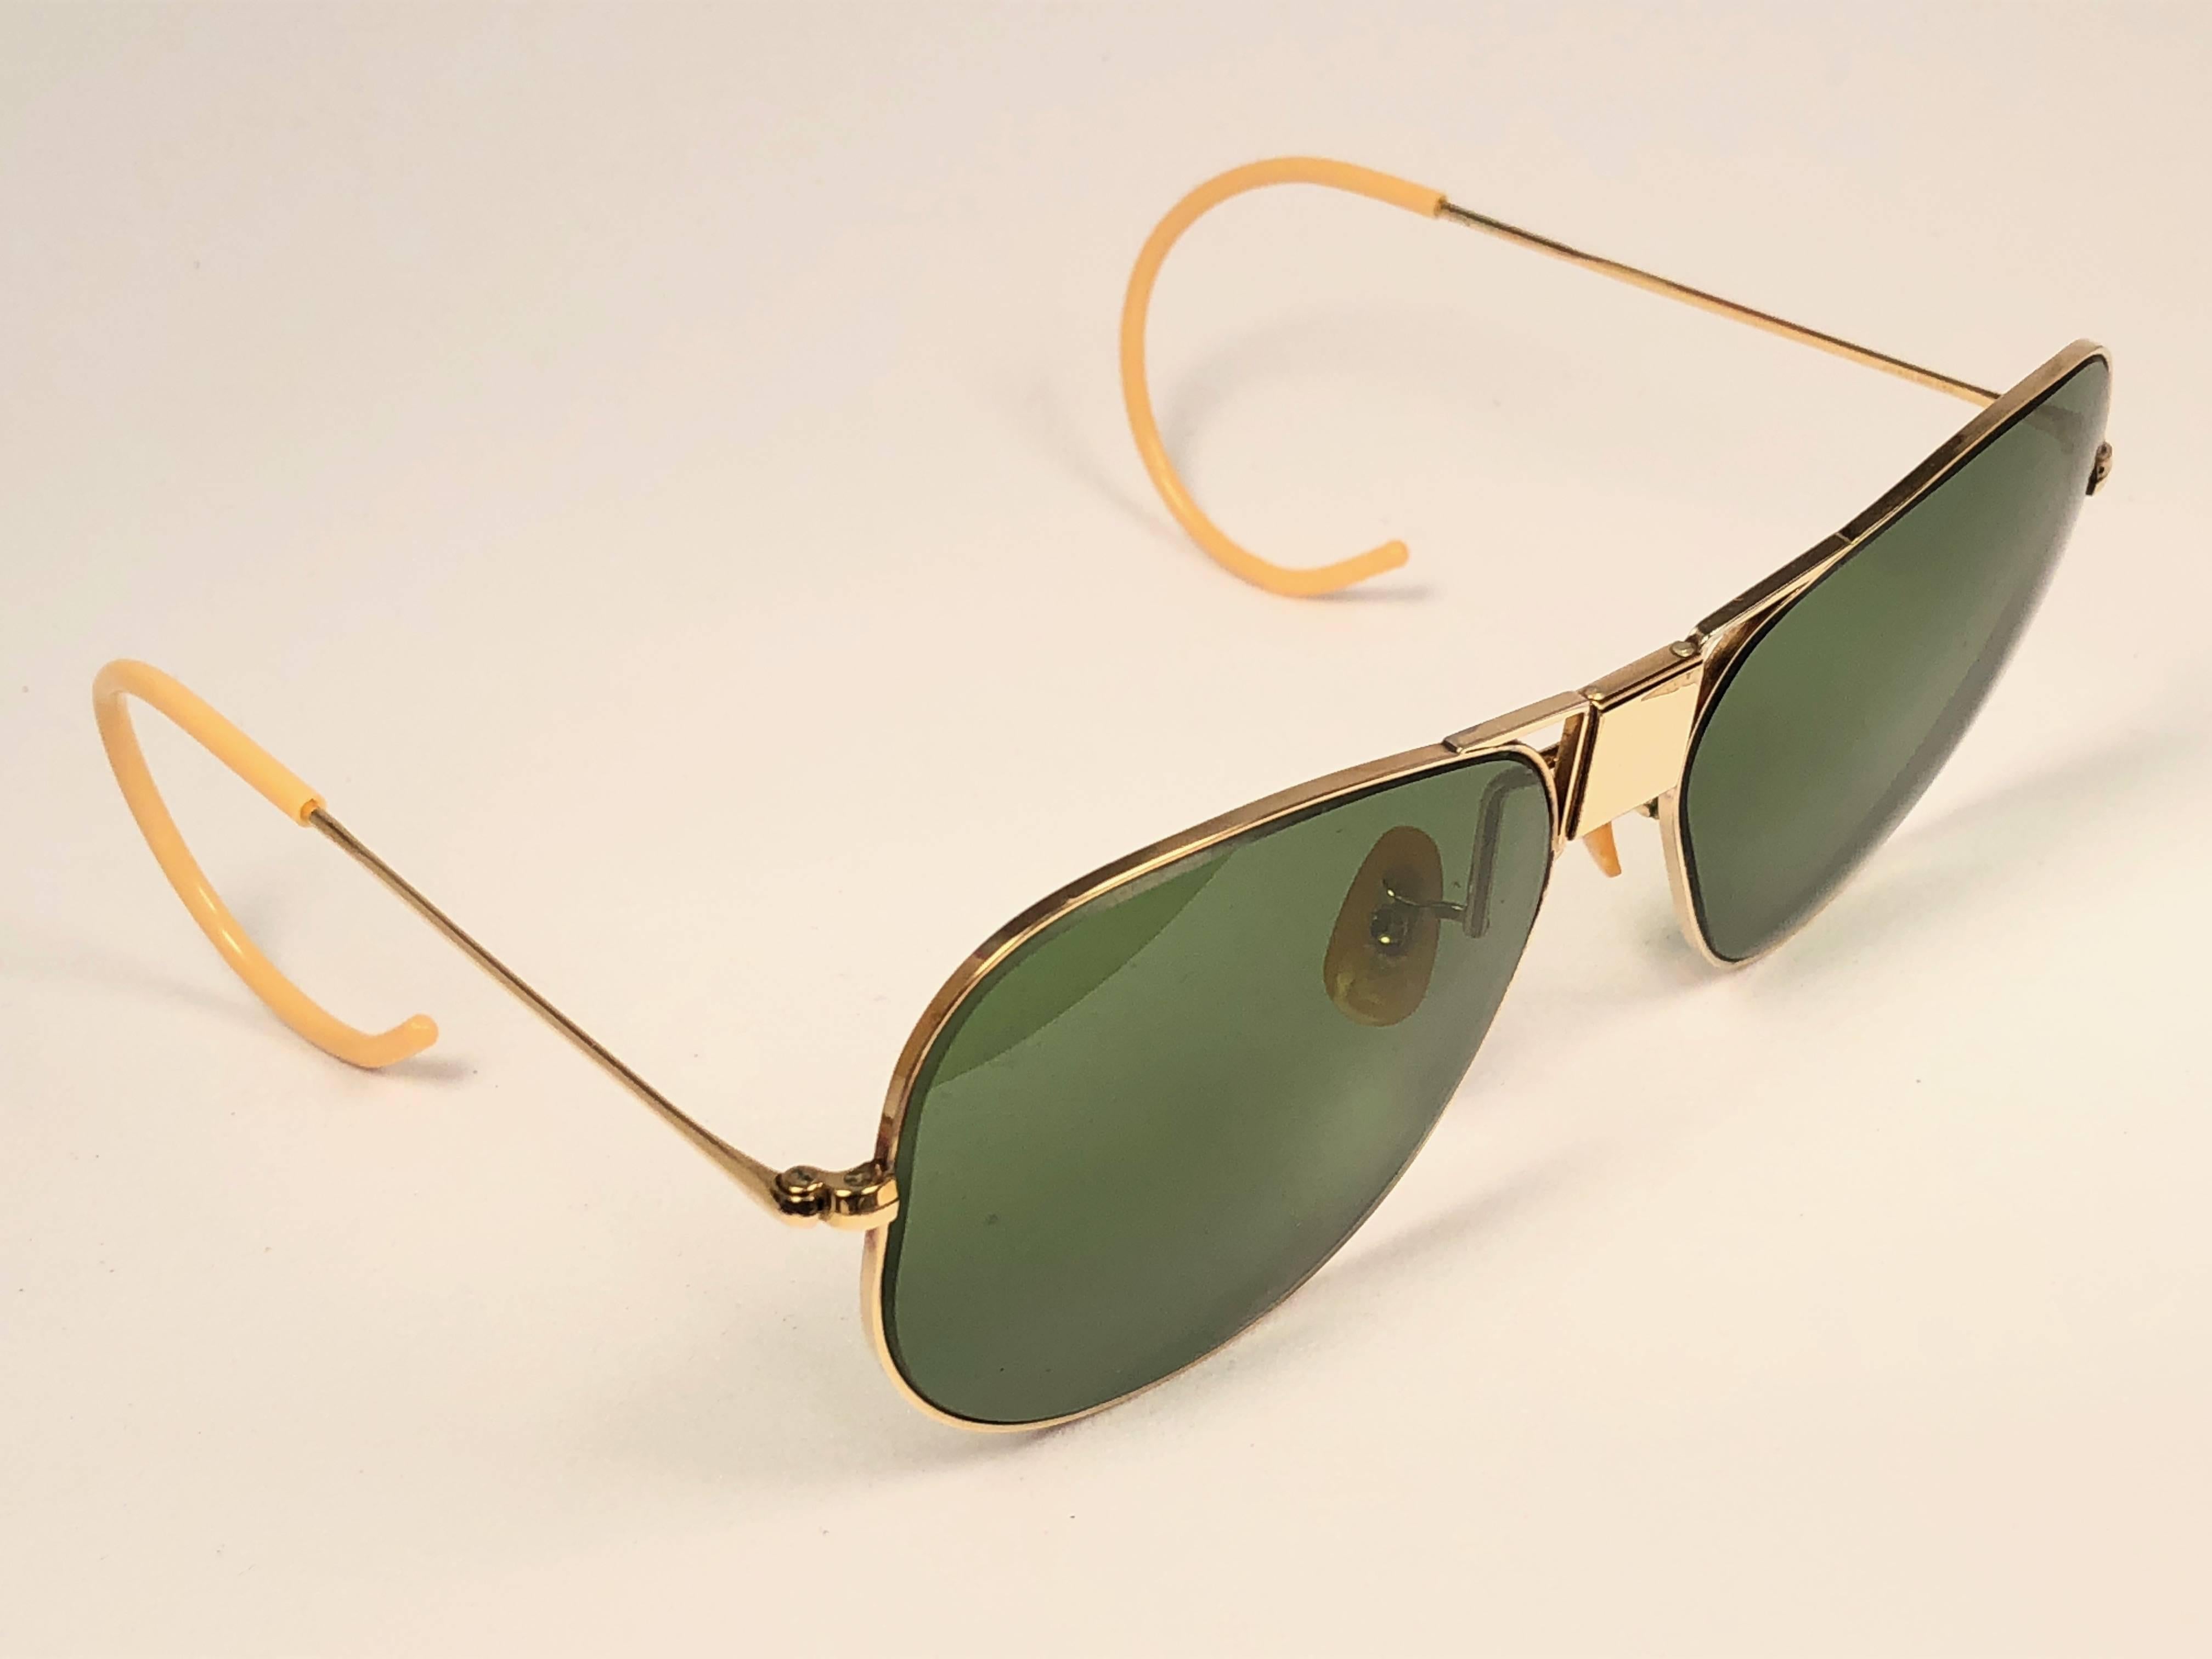 Ultra Rare 1940's Bausch and Lomb Ray Ban Classic Hinged Gold